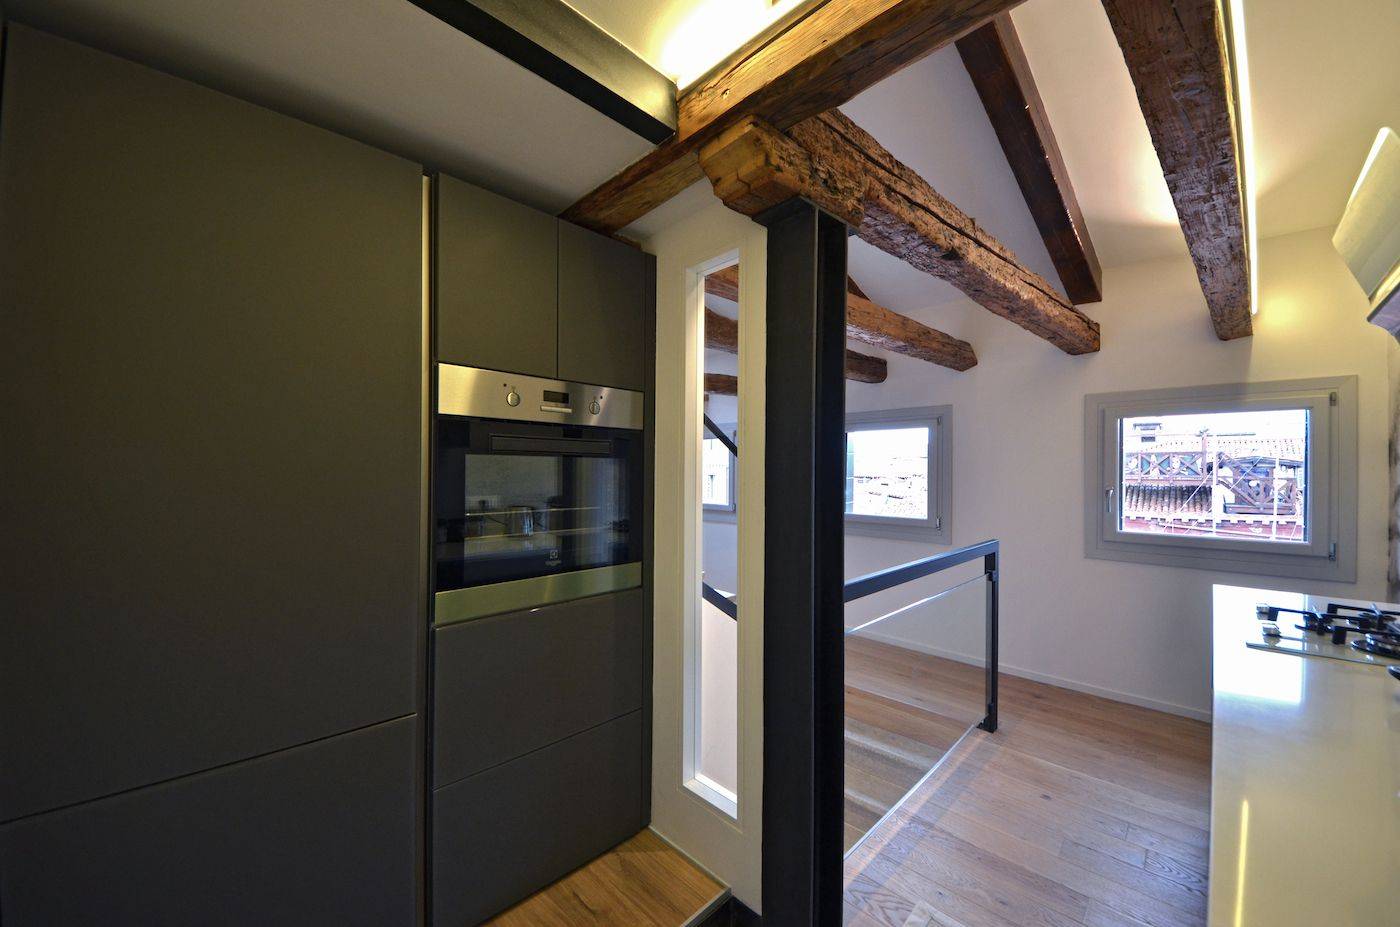 the stylish and well equipped kitchen is really functional